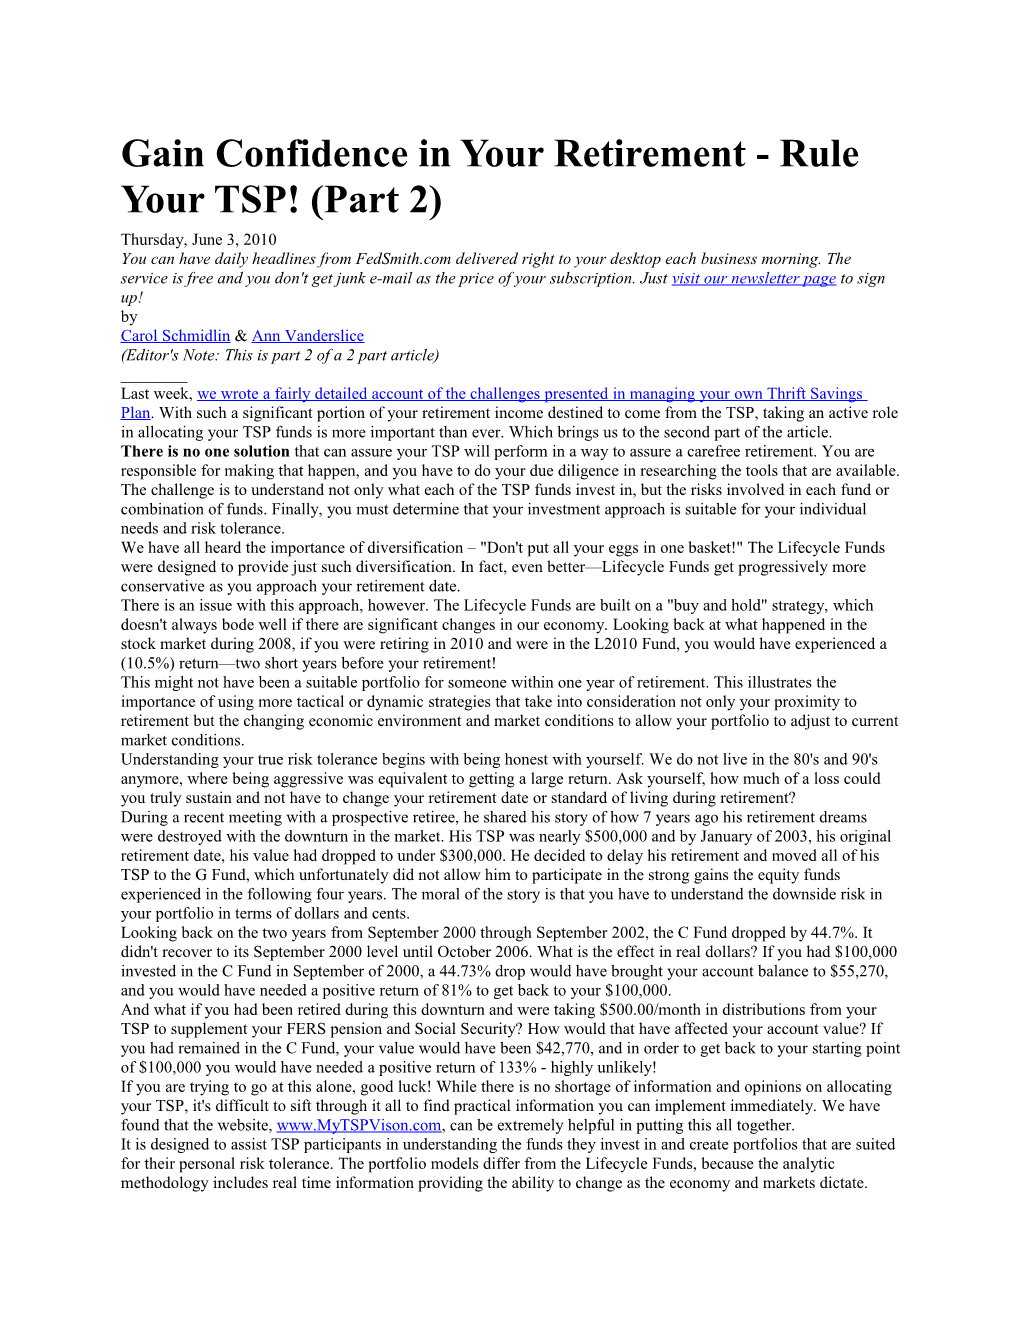 Gain Confidence in Your Retirement - Rule Your TSP